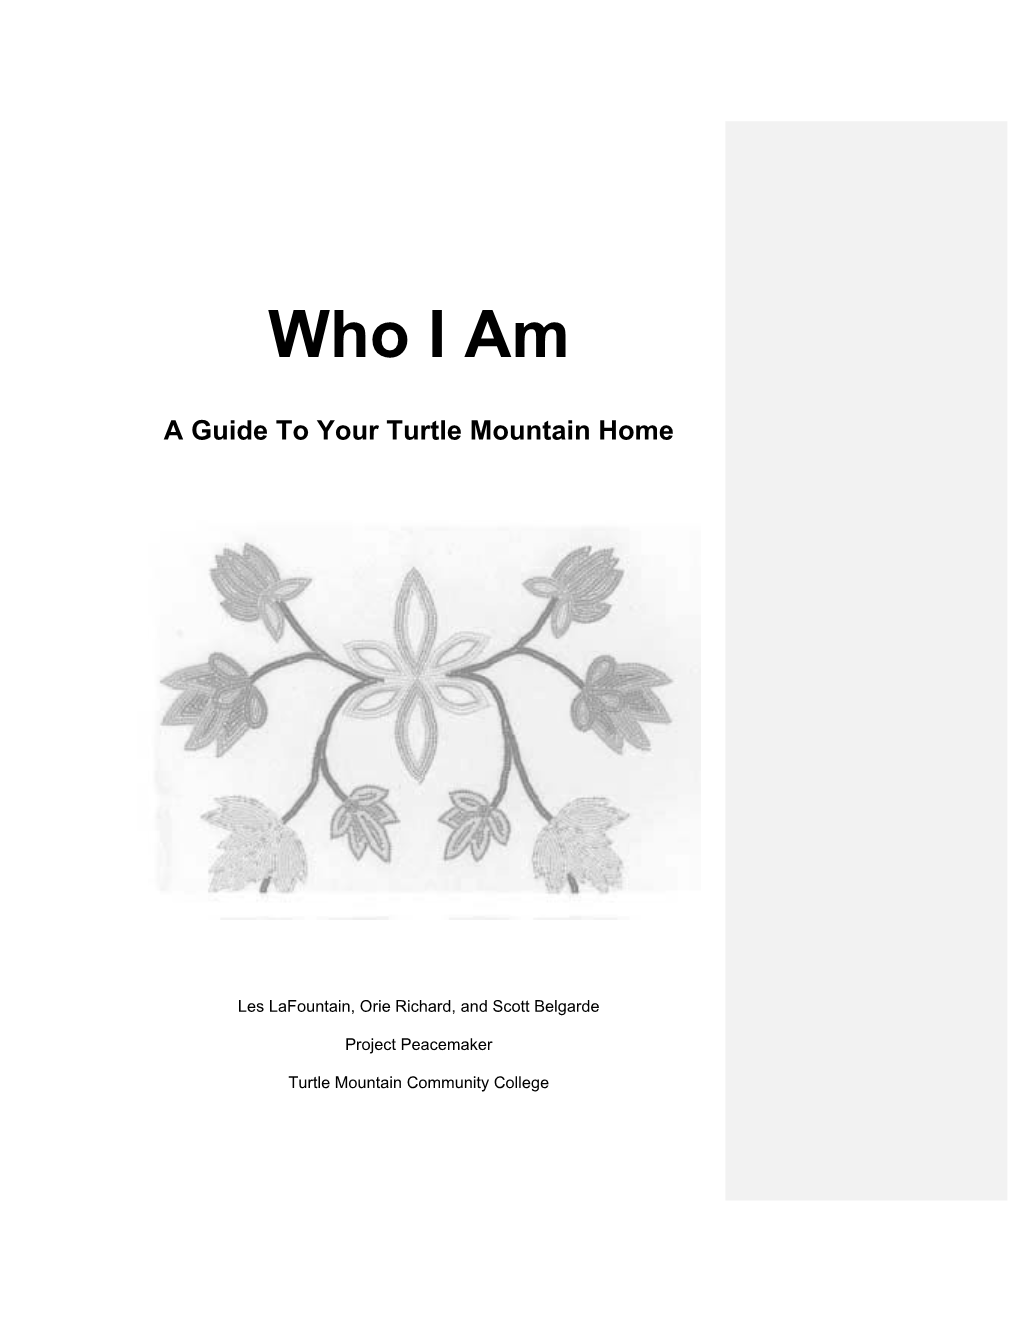 Who I Am: a Guide to Your Turtle Mountain Home